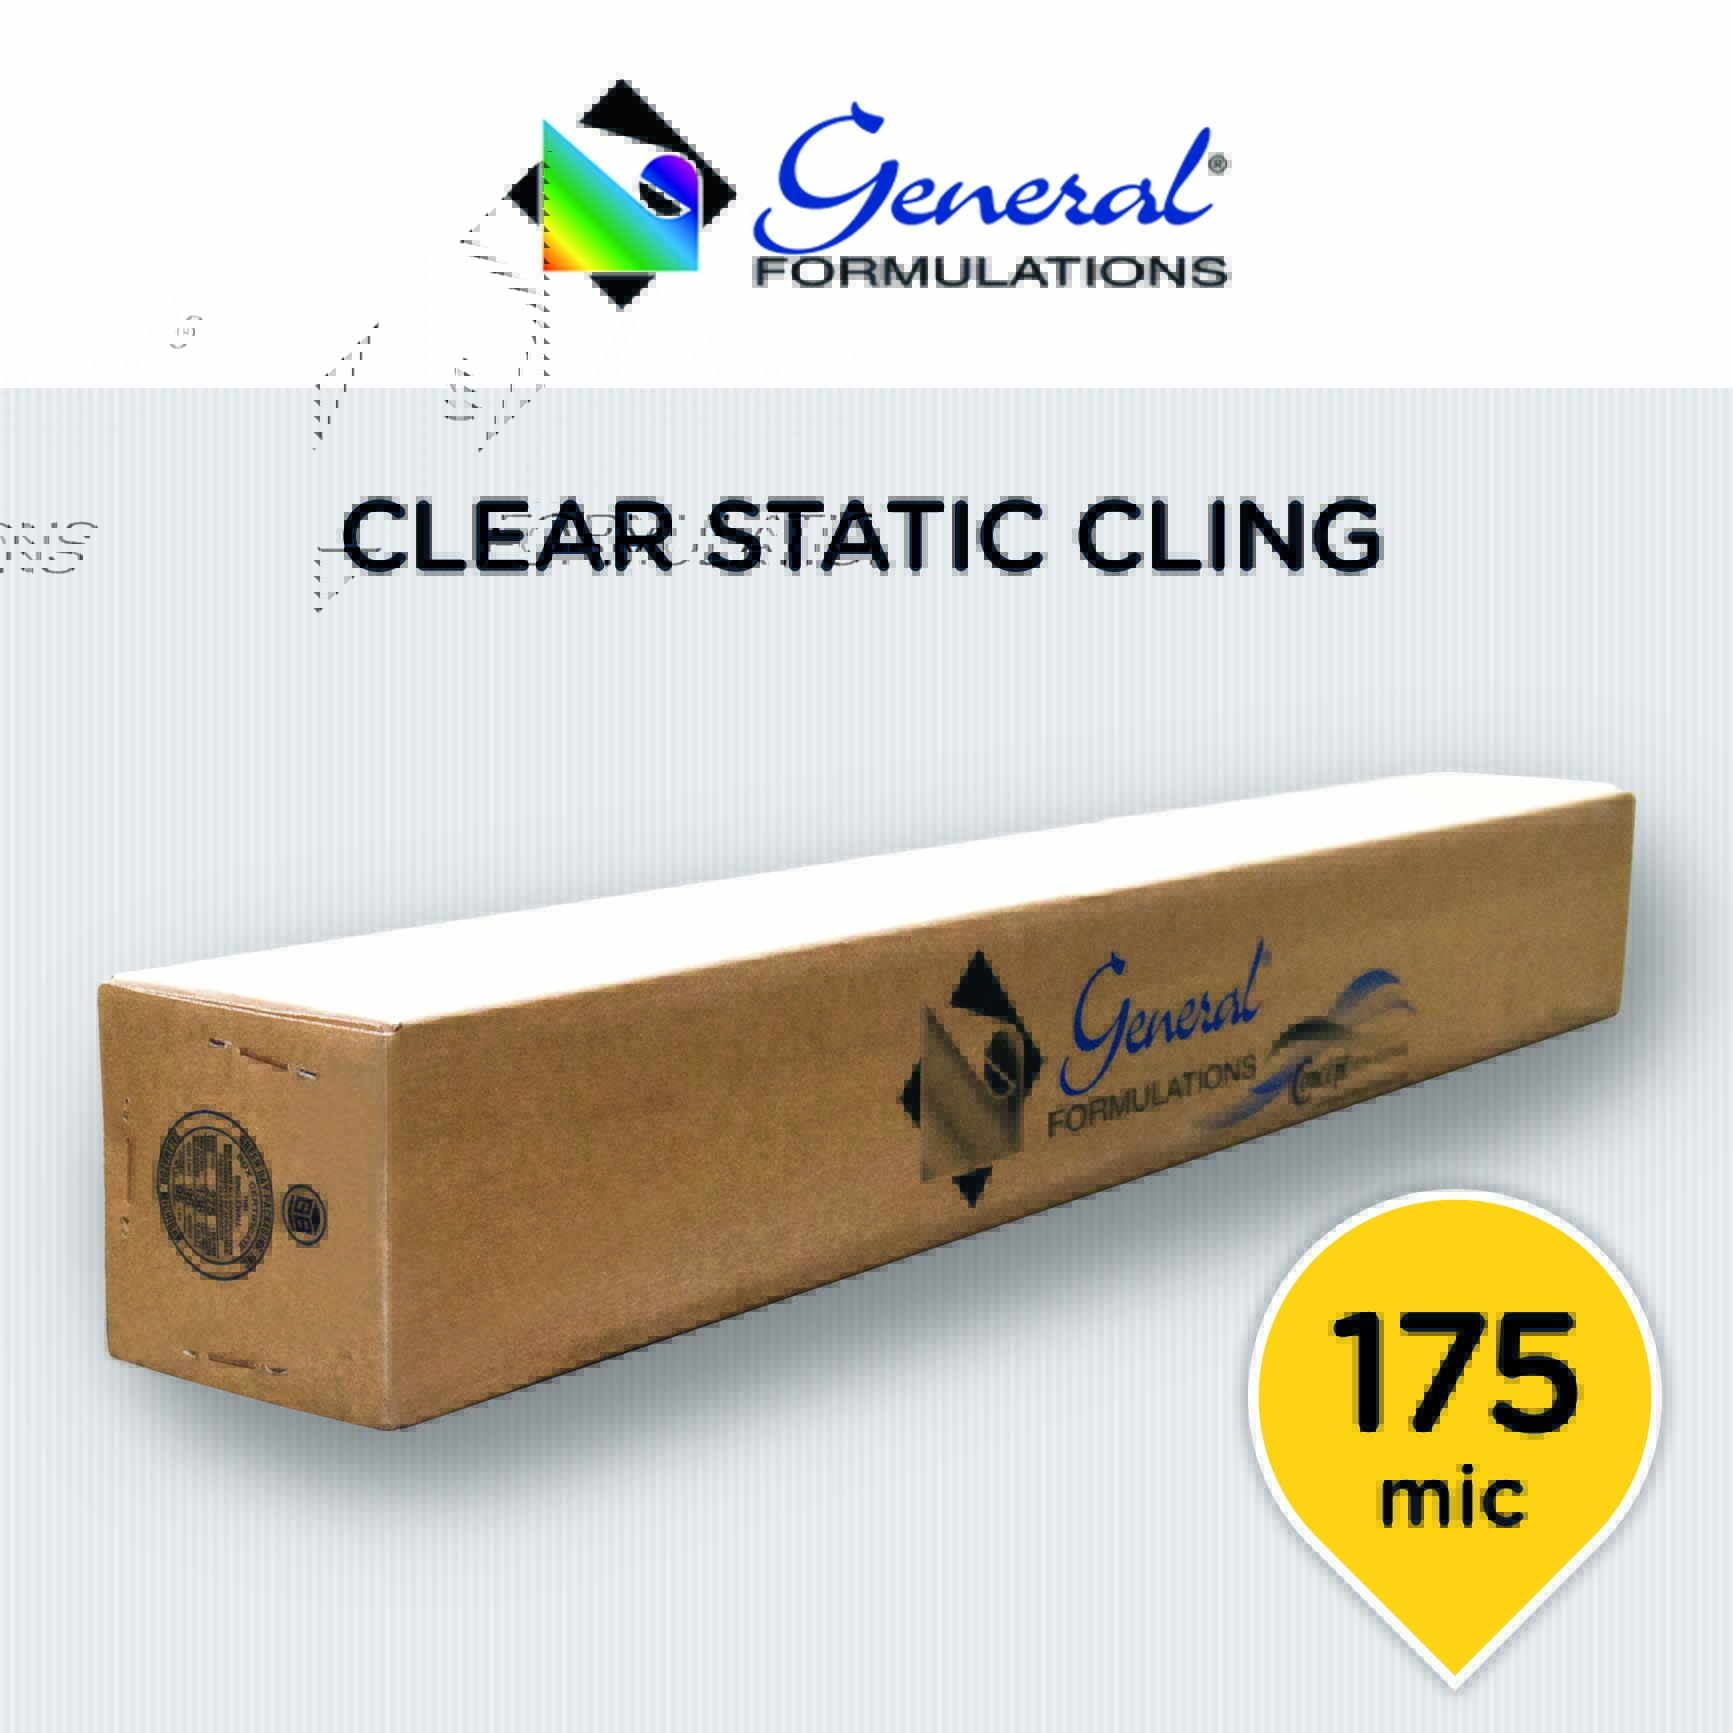 General Formulations 207 175mic Clear Static Cling Innotech